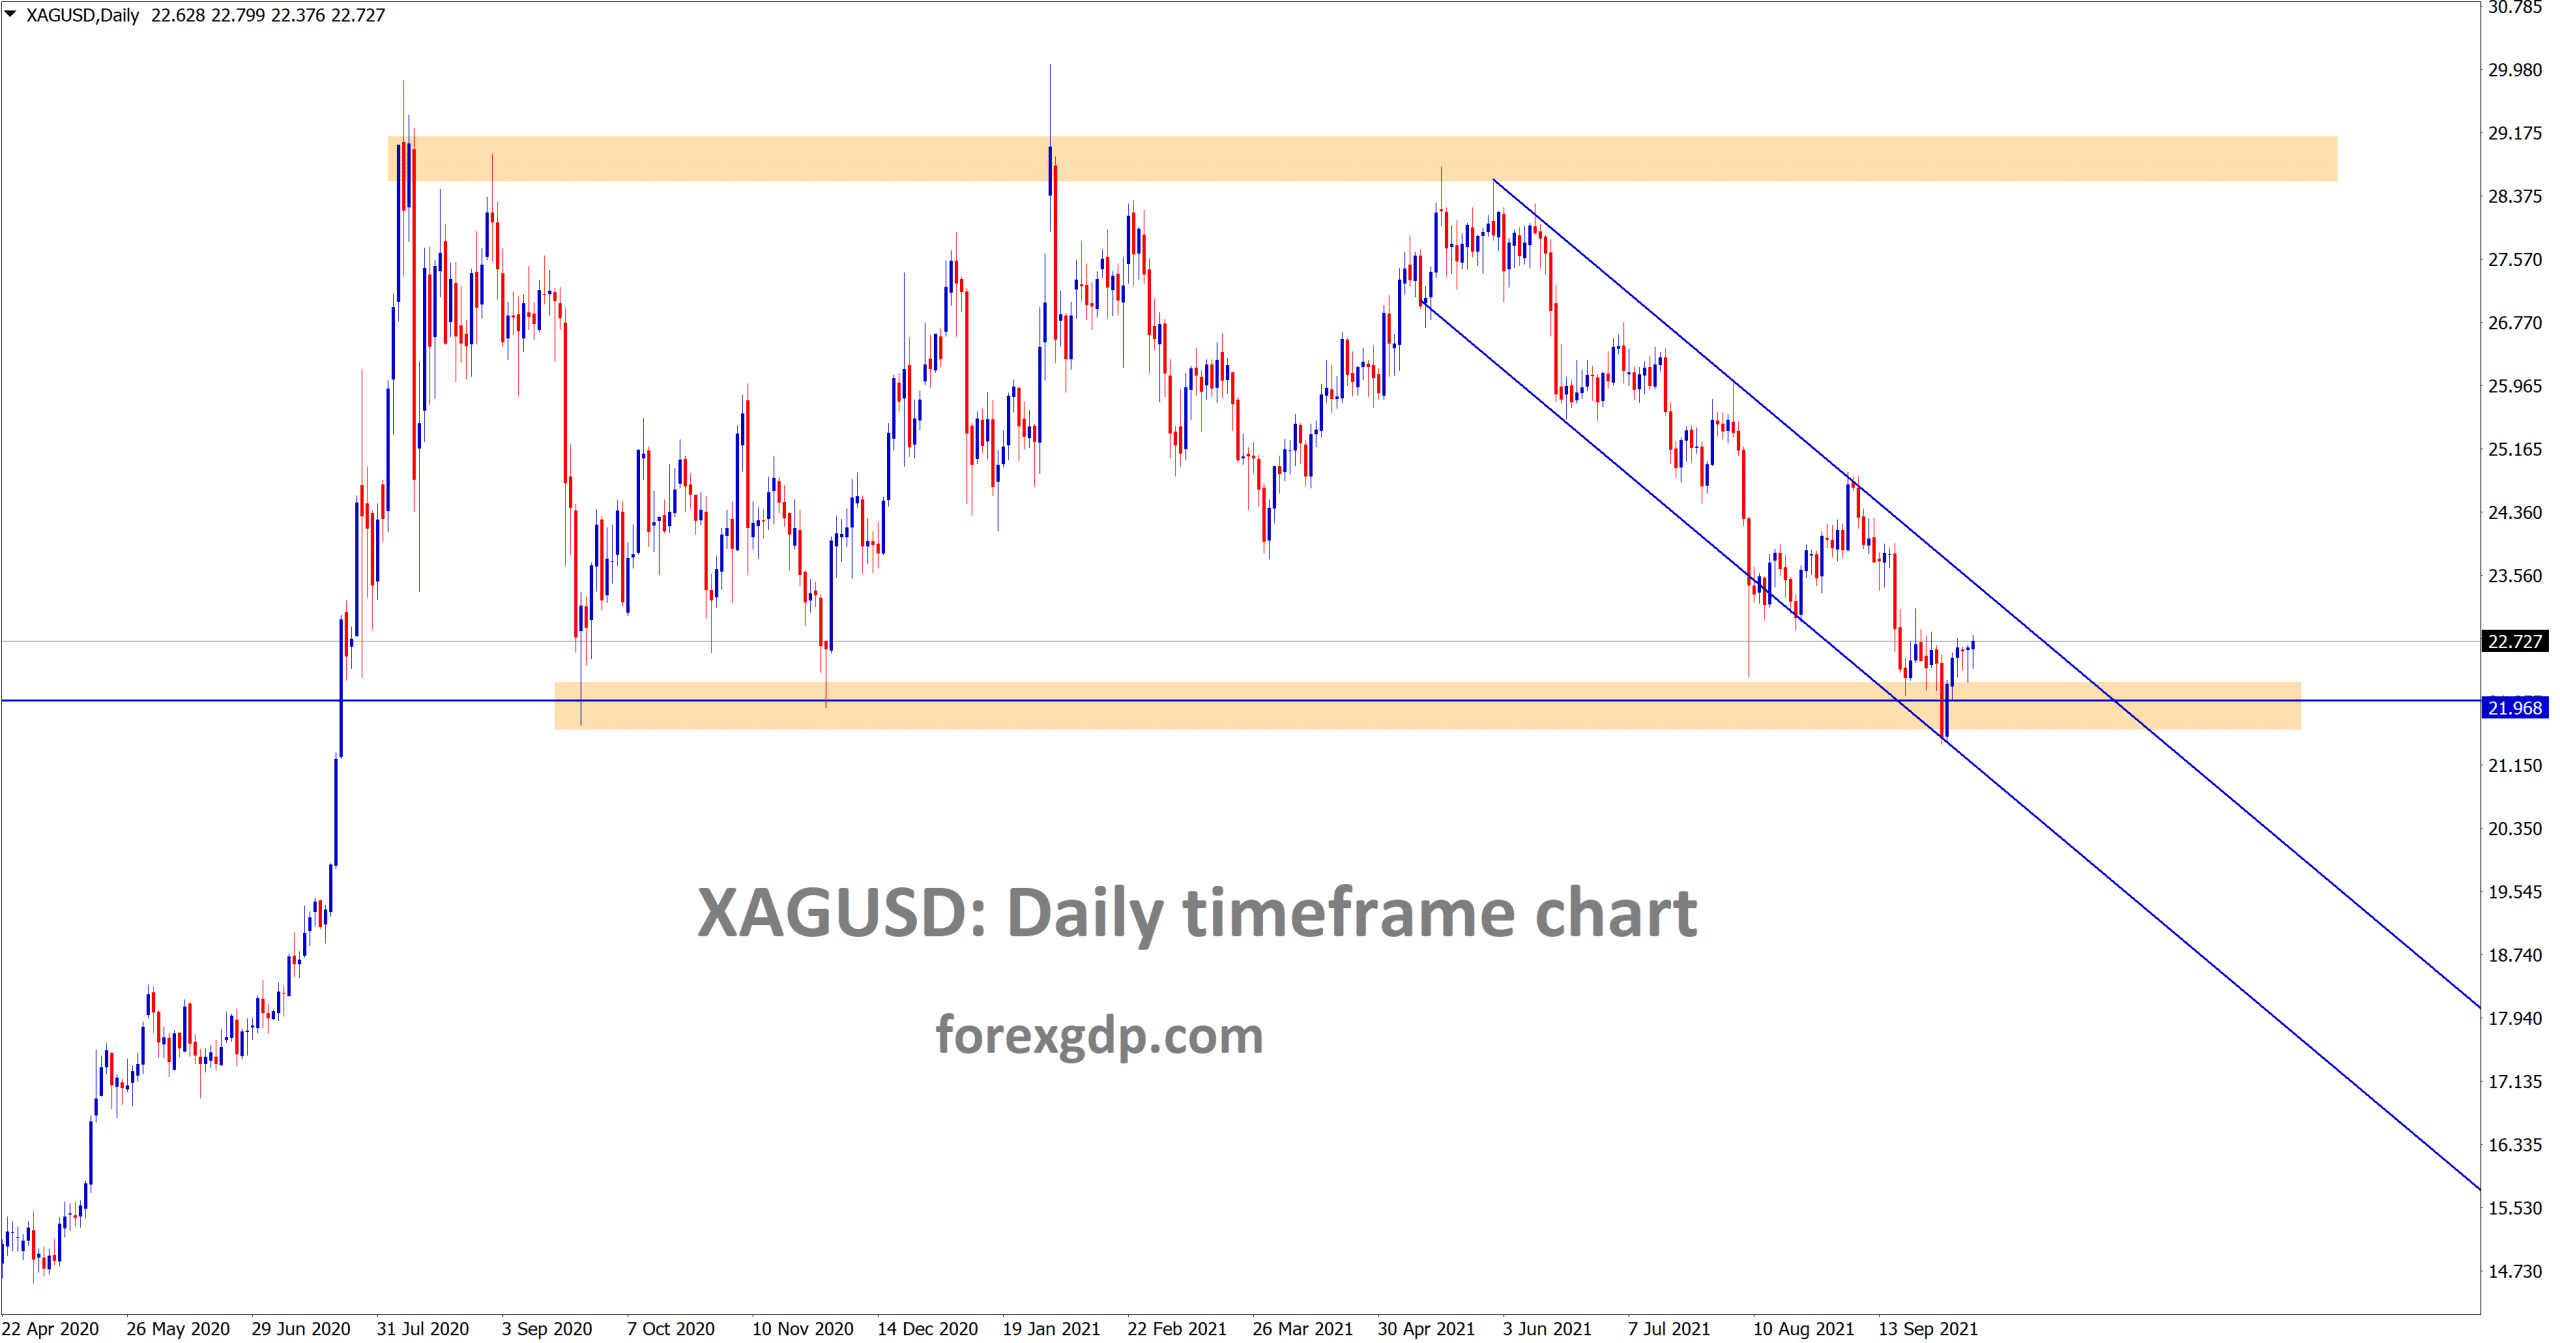 Silver XAGUSD is moving between the descending channel and its rebounding exactly from the horizontal support area